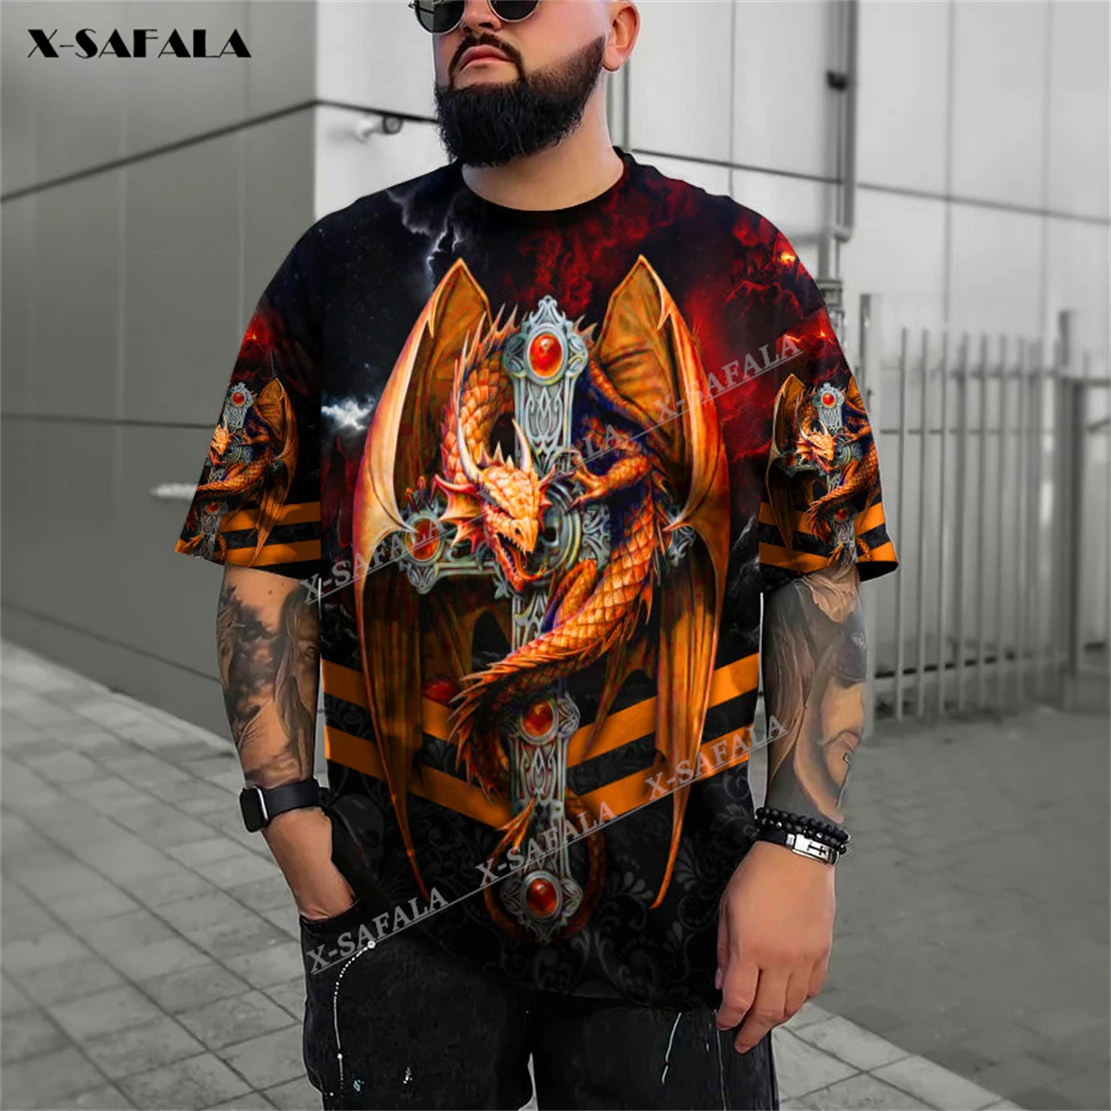 

X-SAFALA Fire Winged Dragon On Cross Skull 3D Printed T-Shirts Tops Tees Short Sleeve Casual Milk Fibe Better Cotton O Collared